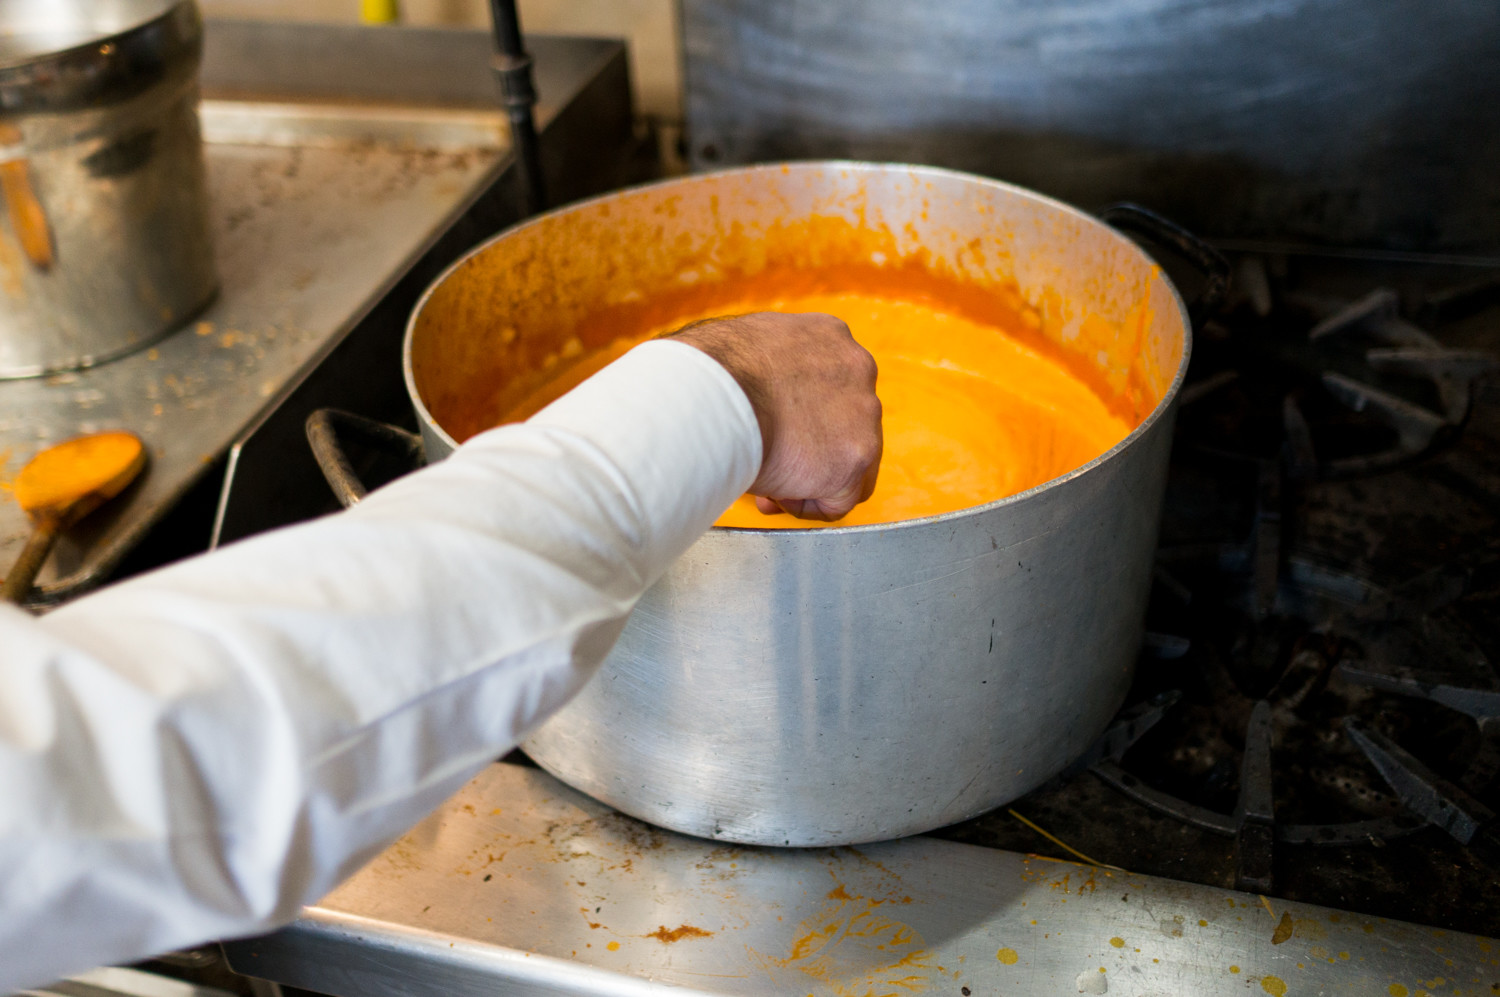 Nando Ghorchian, the owner of Caffe Buon Gusto, stirs a pot of vodka sauce in the kitchen. Ghorchian hopes to provide a space for students and the neighborhood filled with fresh Italian cuisine.